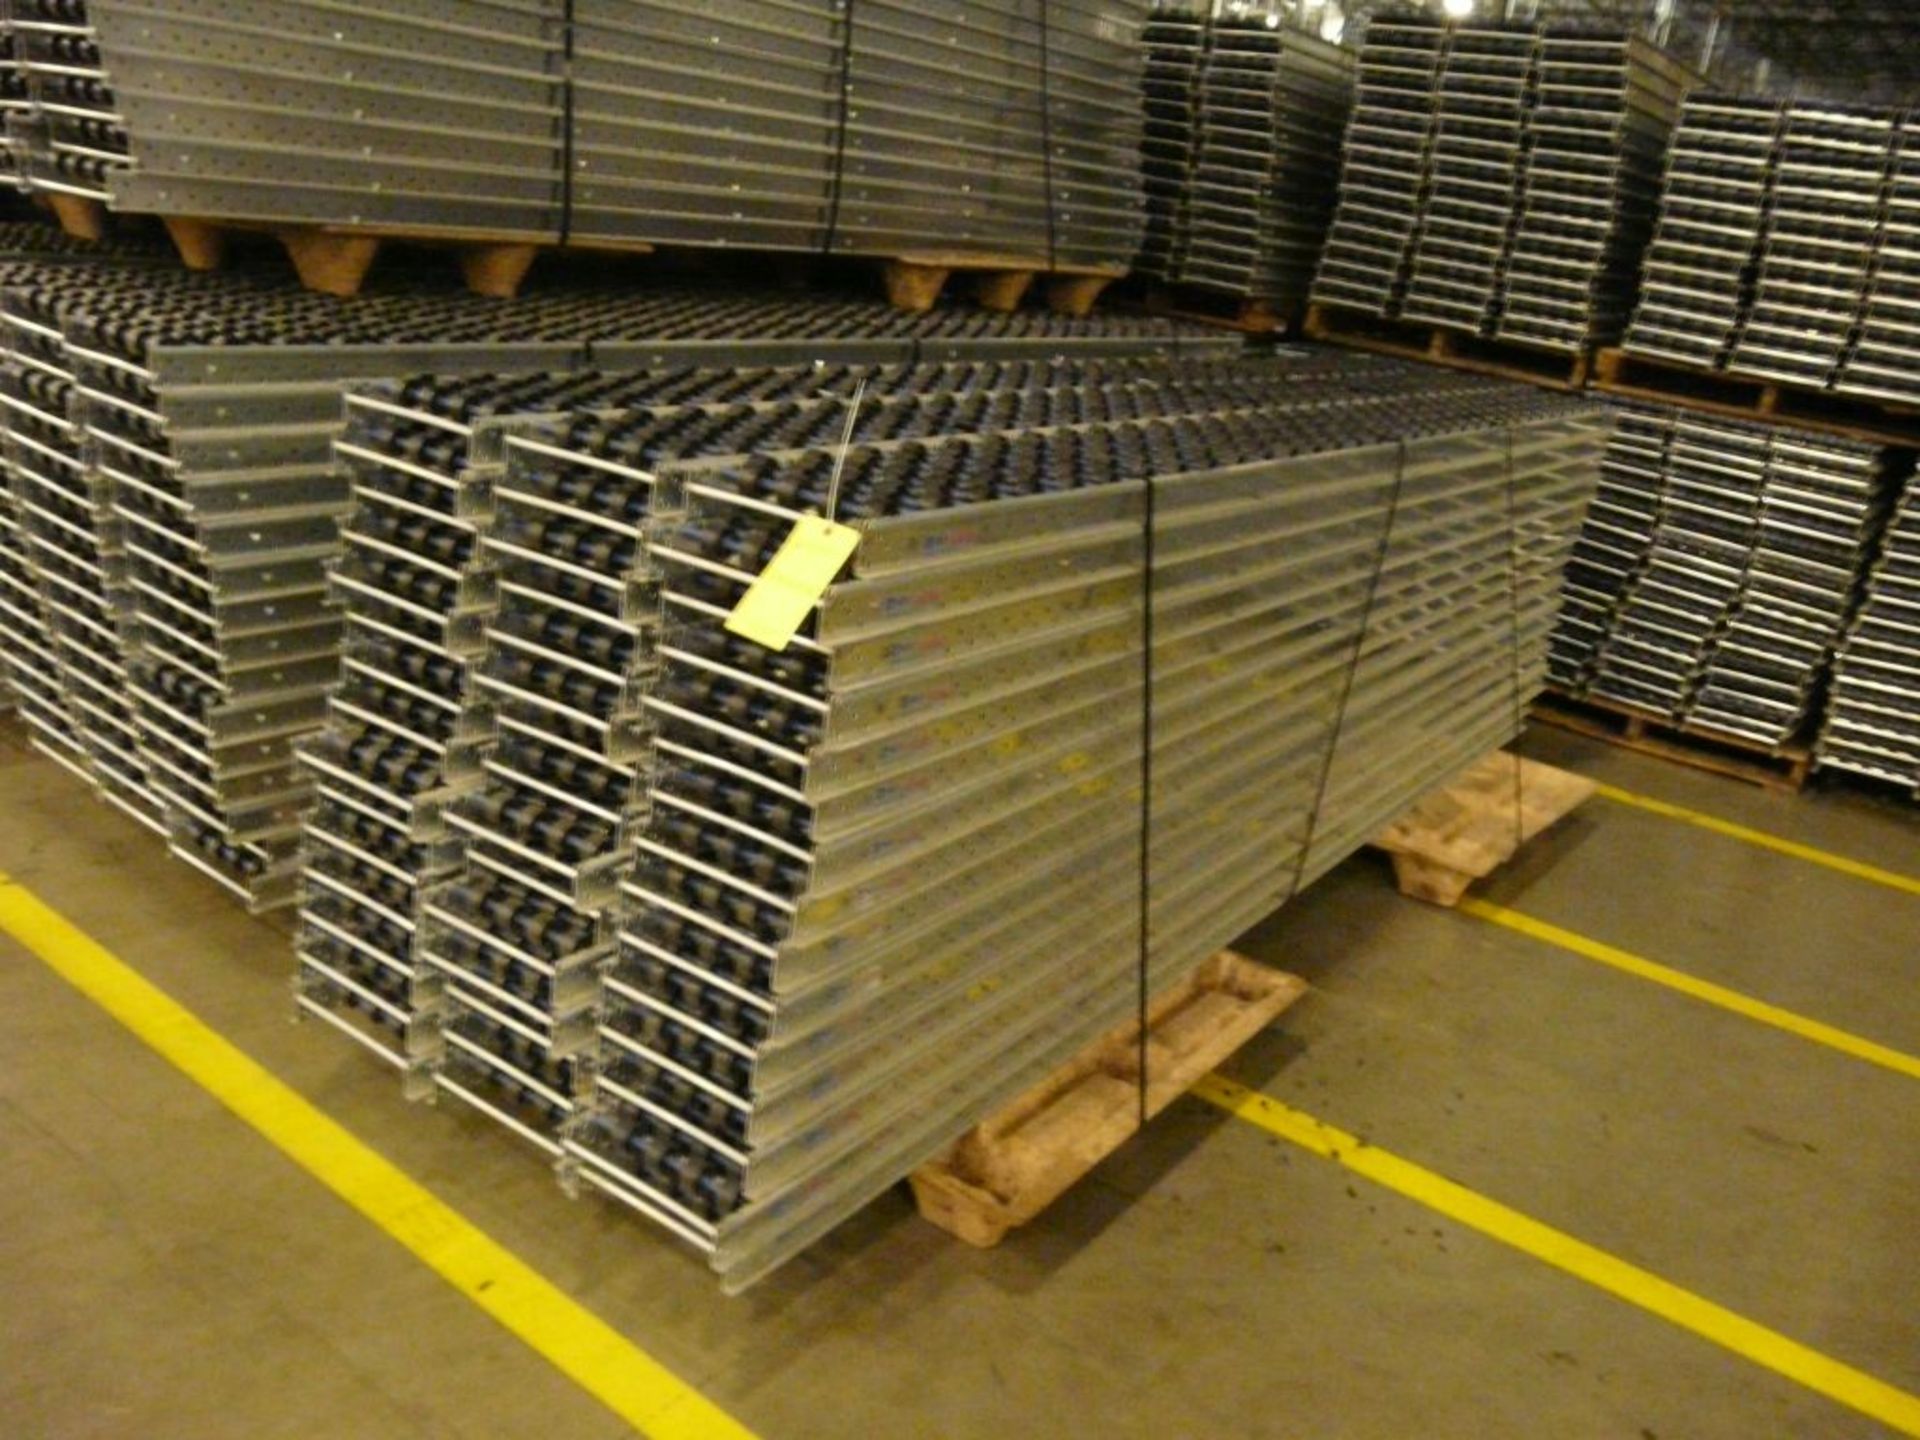 Lot of (90) SpanTrack Wheelbed Carton Flow Conveyors - 11.5'L x 11"W; Tag: 223594 - $30 Lot